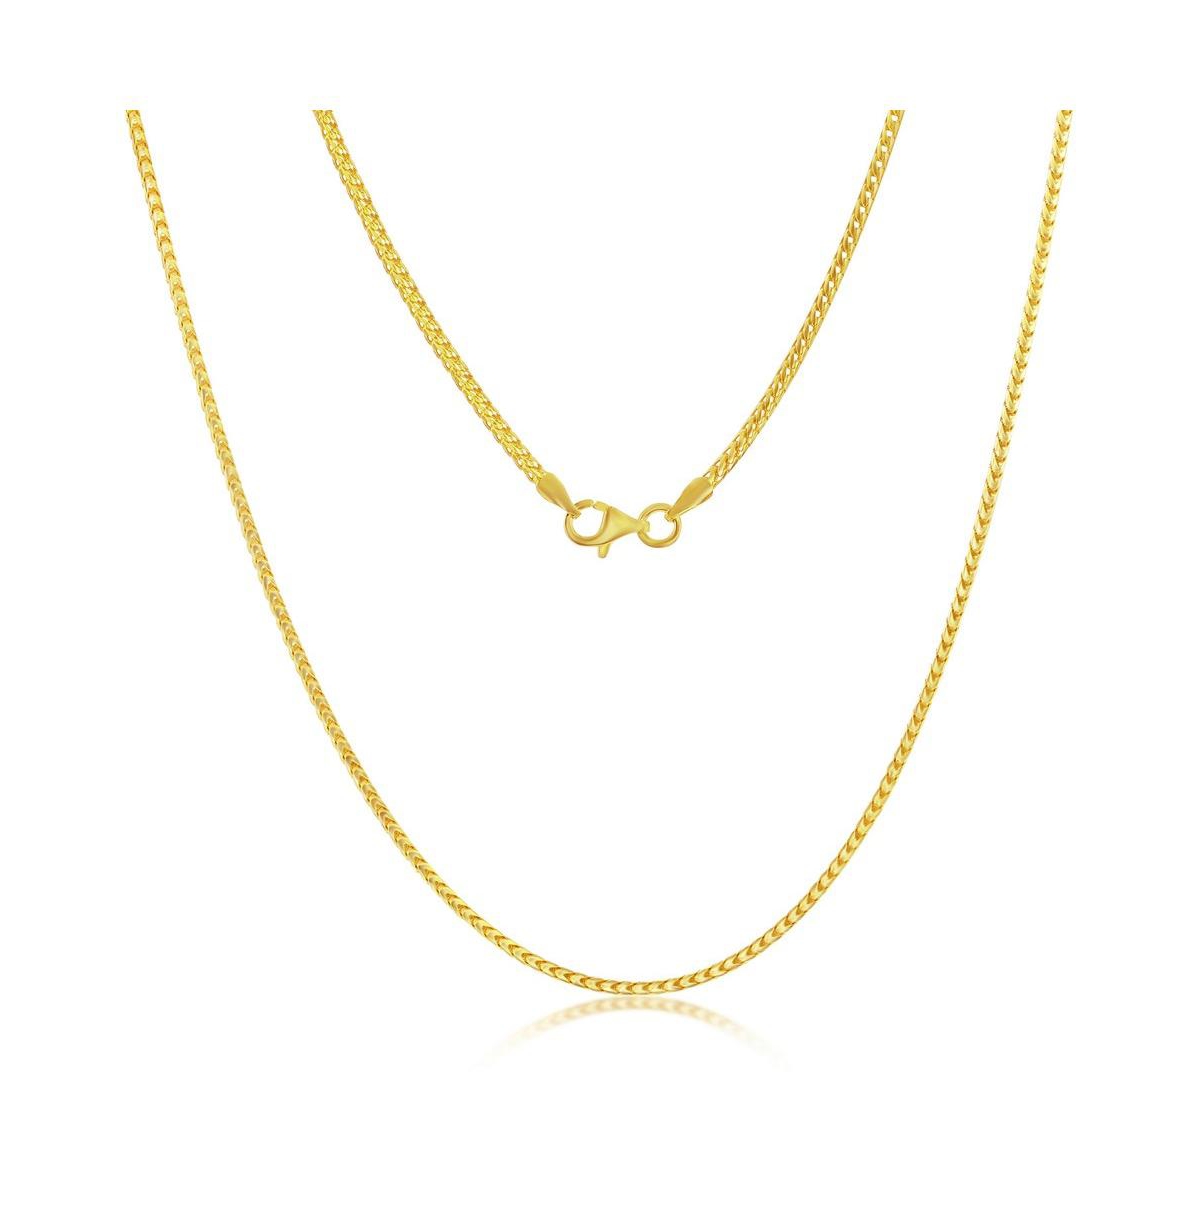 Franco Chain 1.5mm Sterling Silver or Gold Plated Over Sterling Silver 18" Necklace - Silver